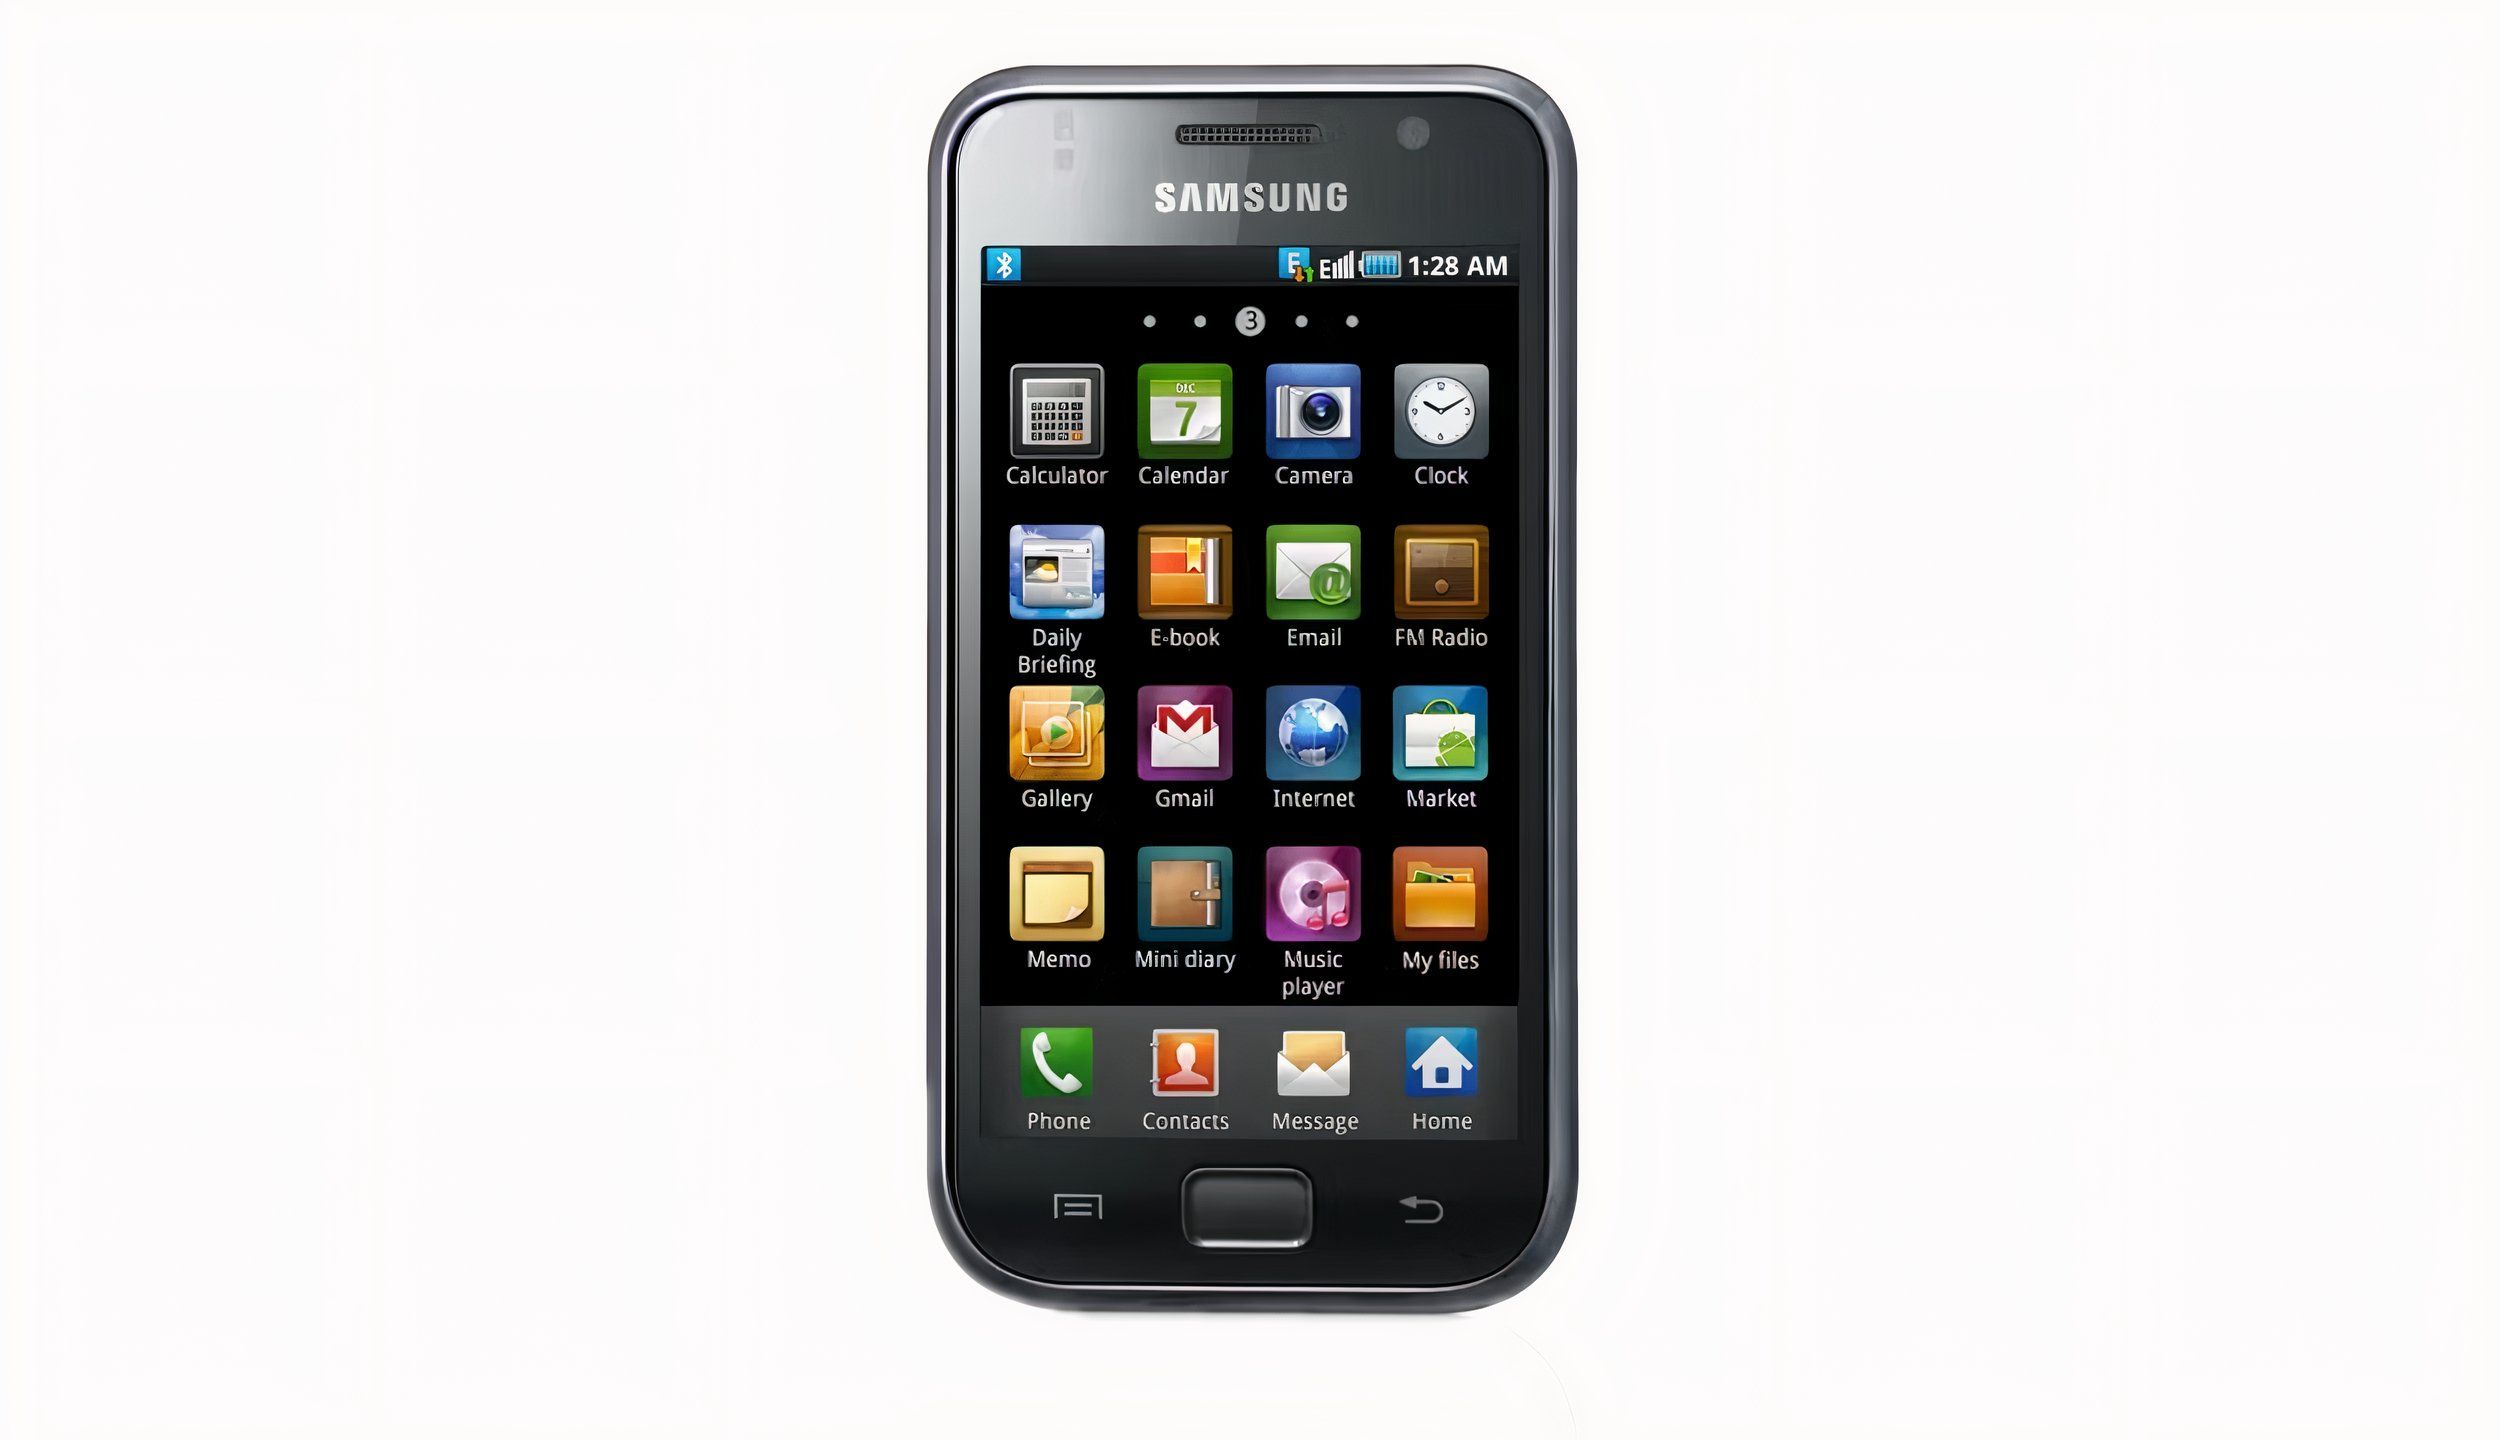 A Samsung Galaxy S smartphone (with a home button) on a white background.